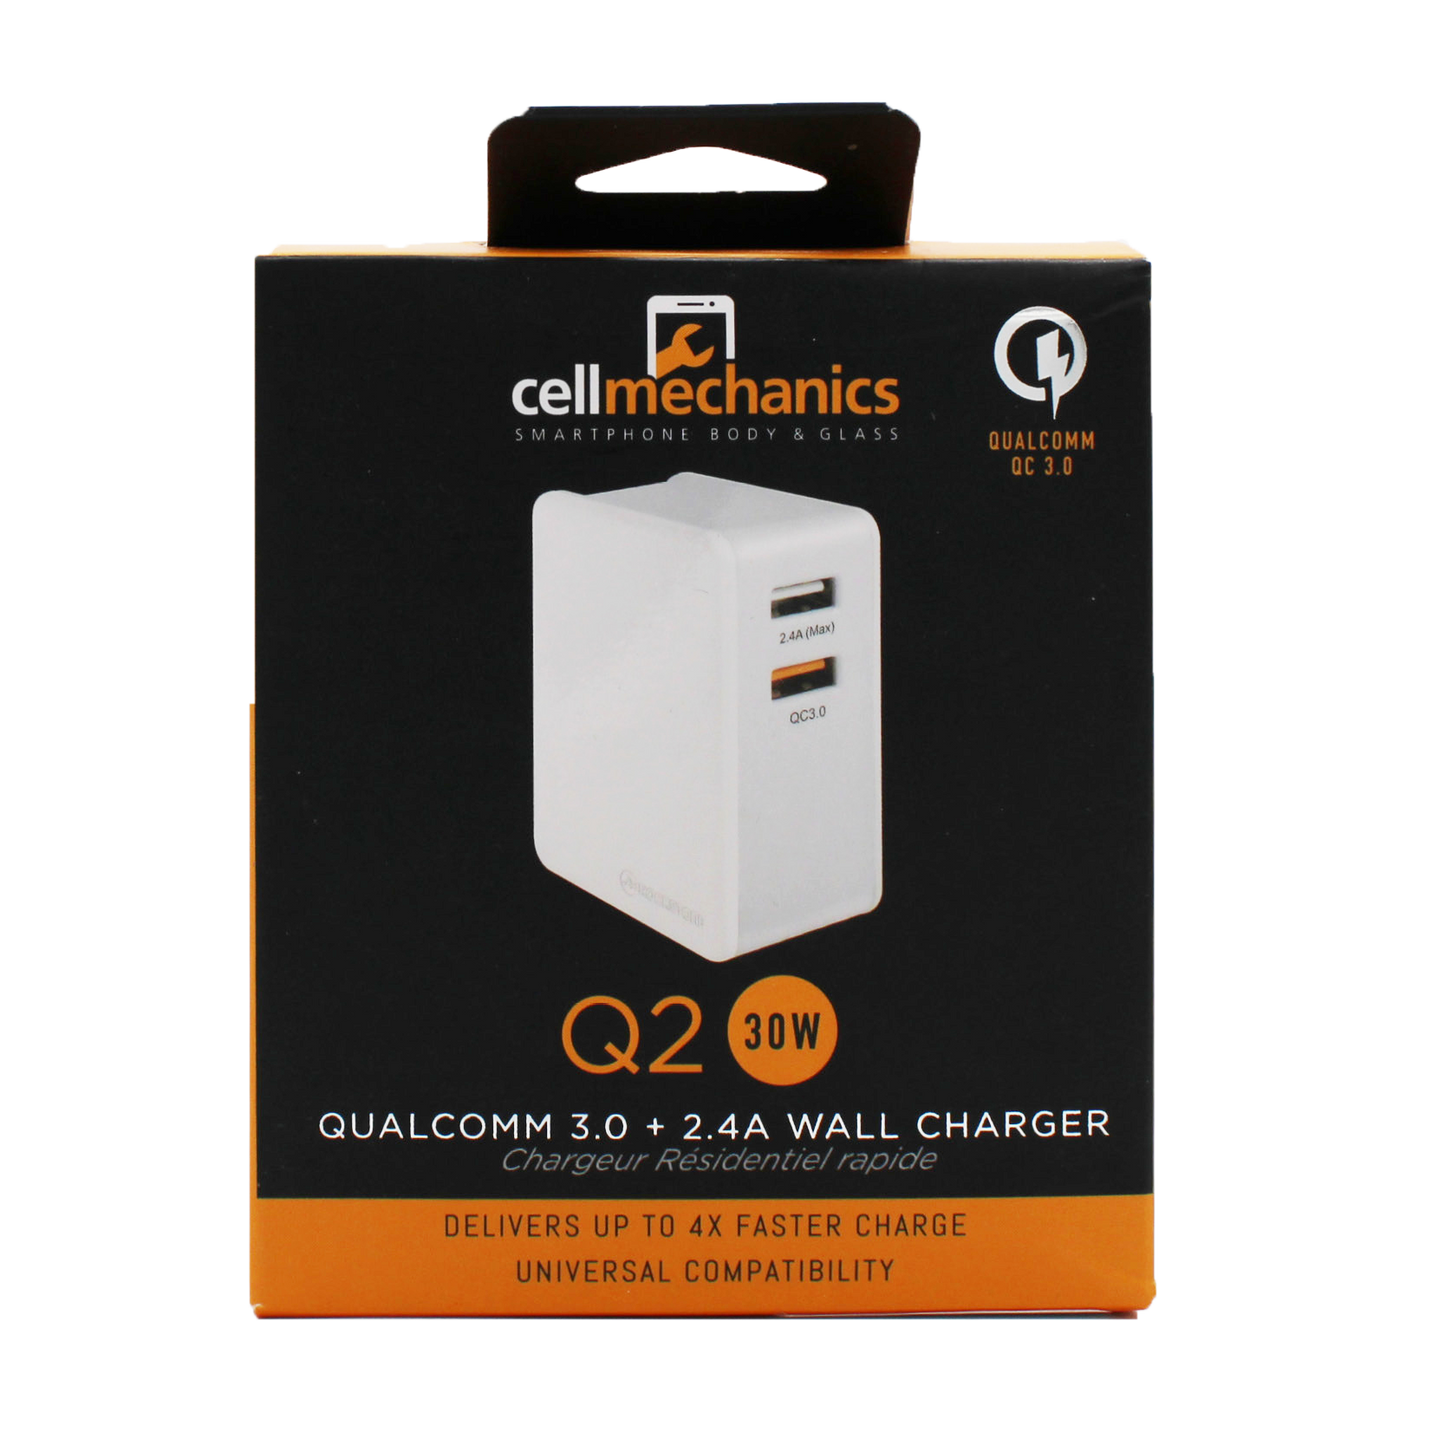 Q2 2 Port Wall Charger - 30W